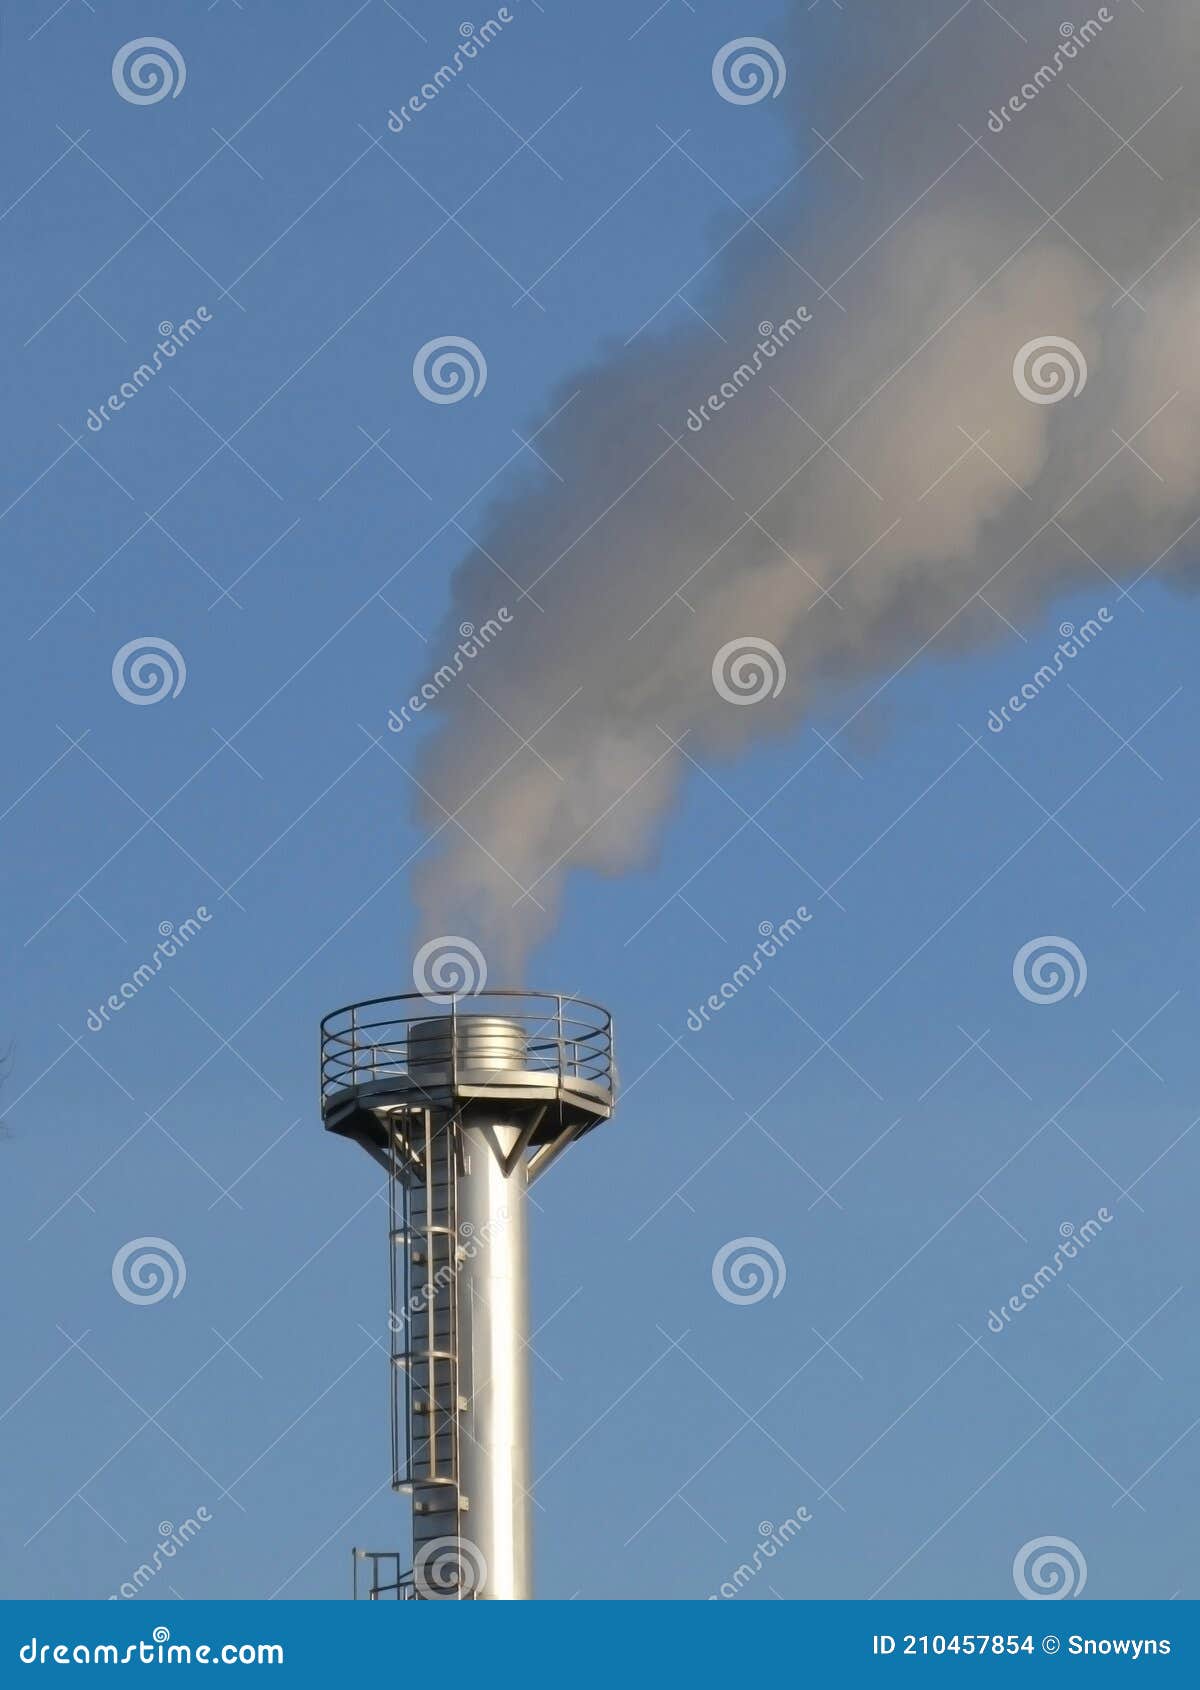 smoke spews out of a chimney at an industrial plant